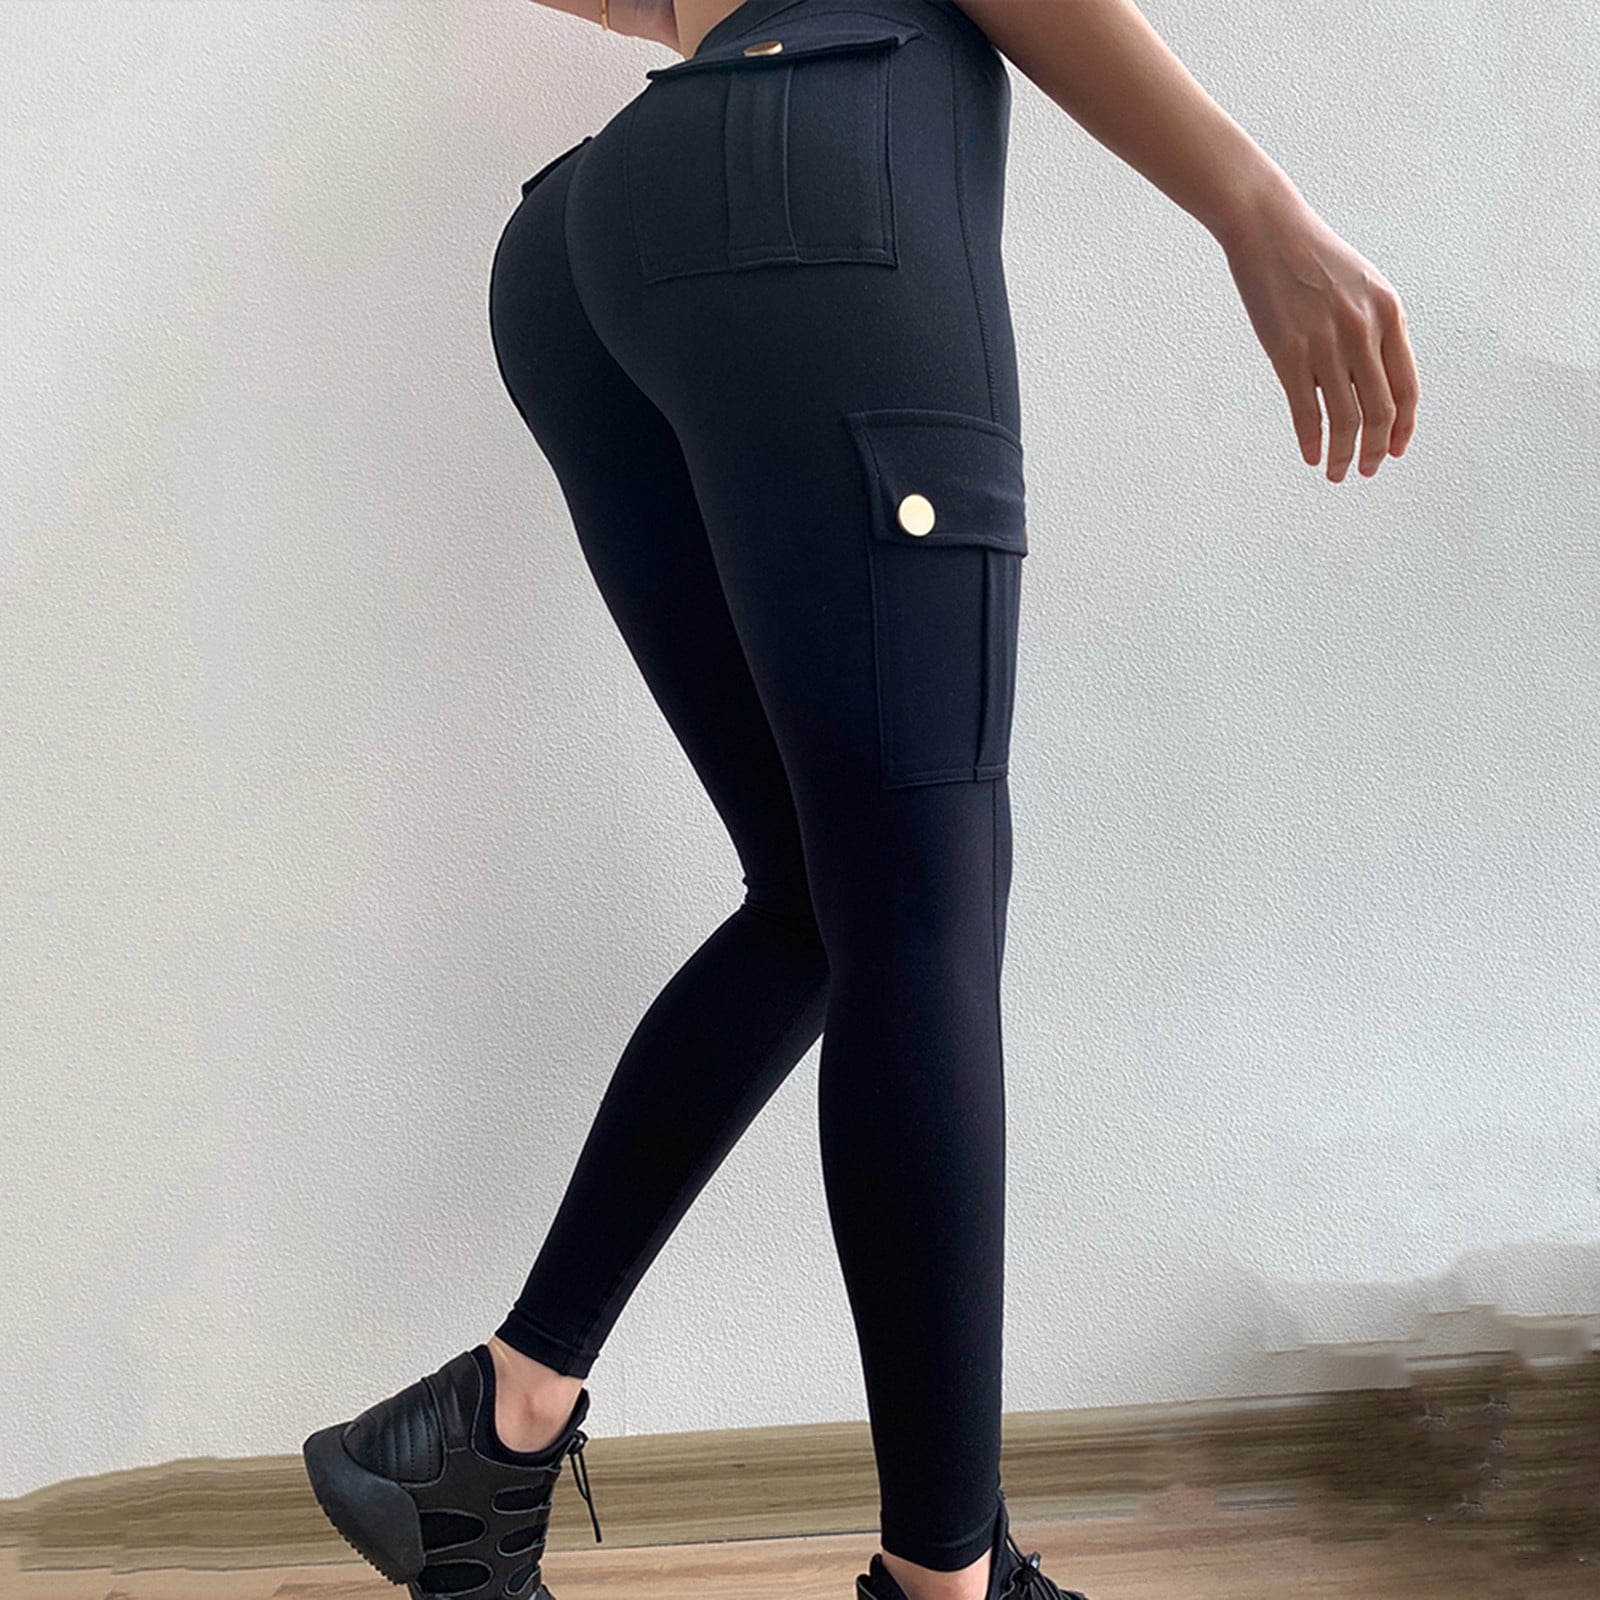 Stretchable Leggings with Pockets for Yoga, Pilates, and Fashionable  Comfort